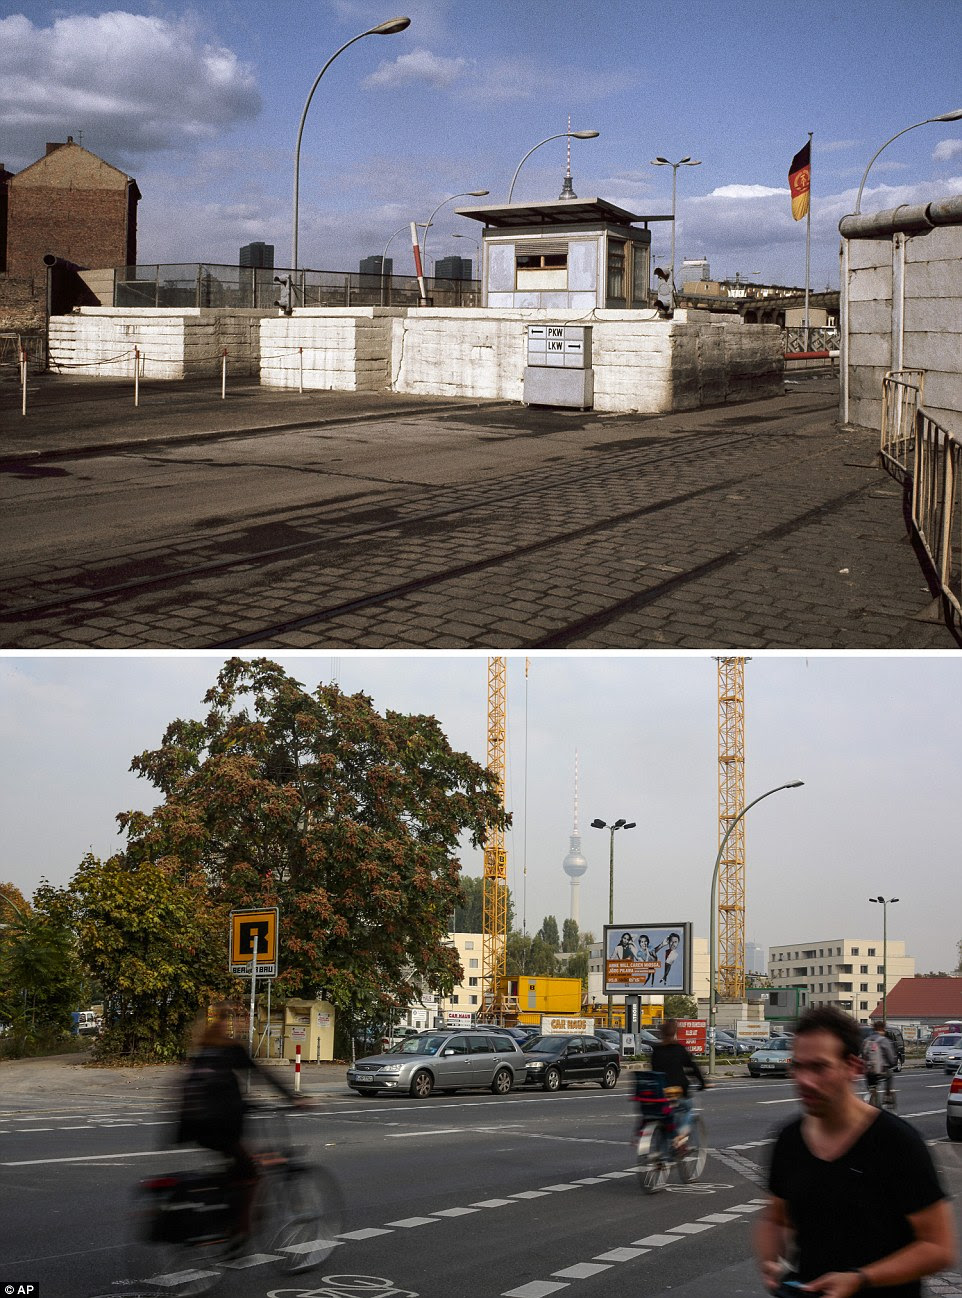 Transport: On March 12, 1971, anyone wanting to cross the Berlin Wall had to pass through checkpoints, such as this one at Heinrich-Heine-Strasse, while today people are free to cycle, drive and walk through the area, which has completely transformed